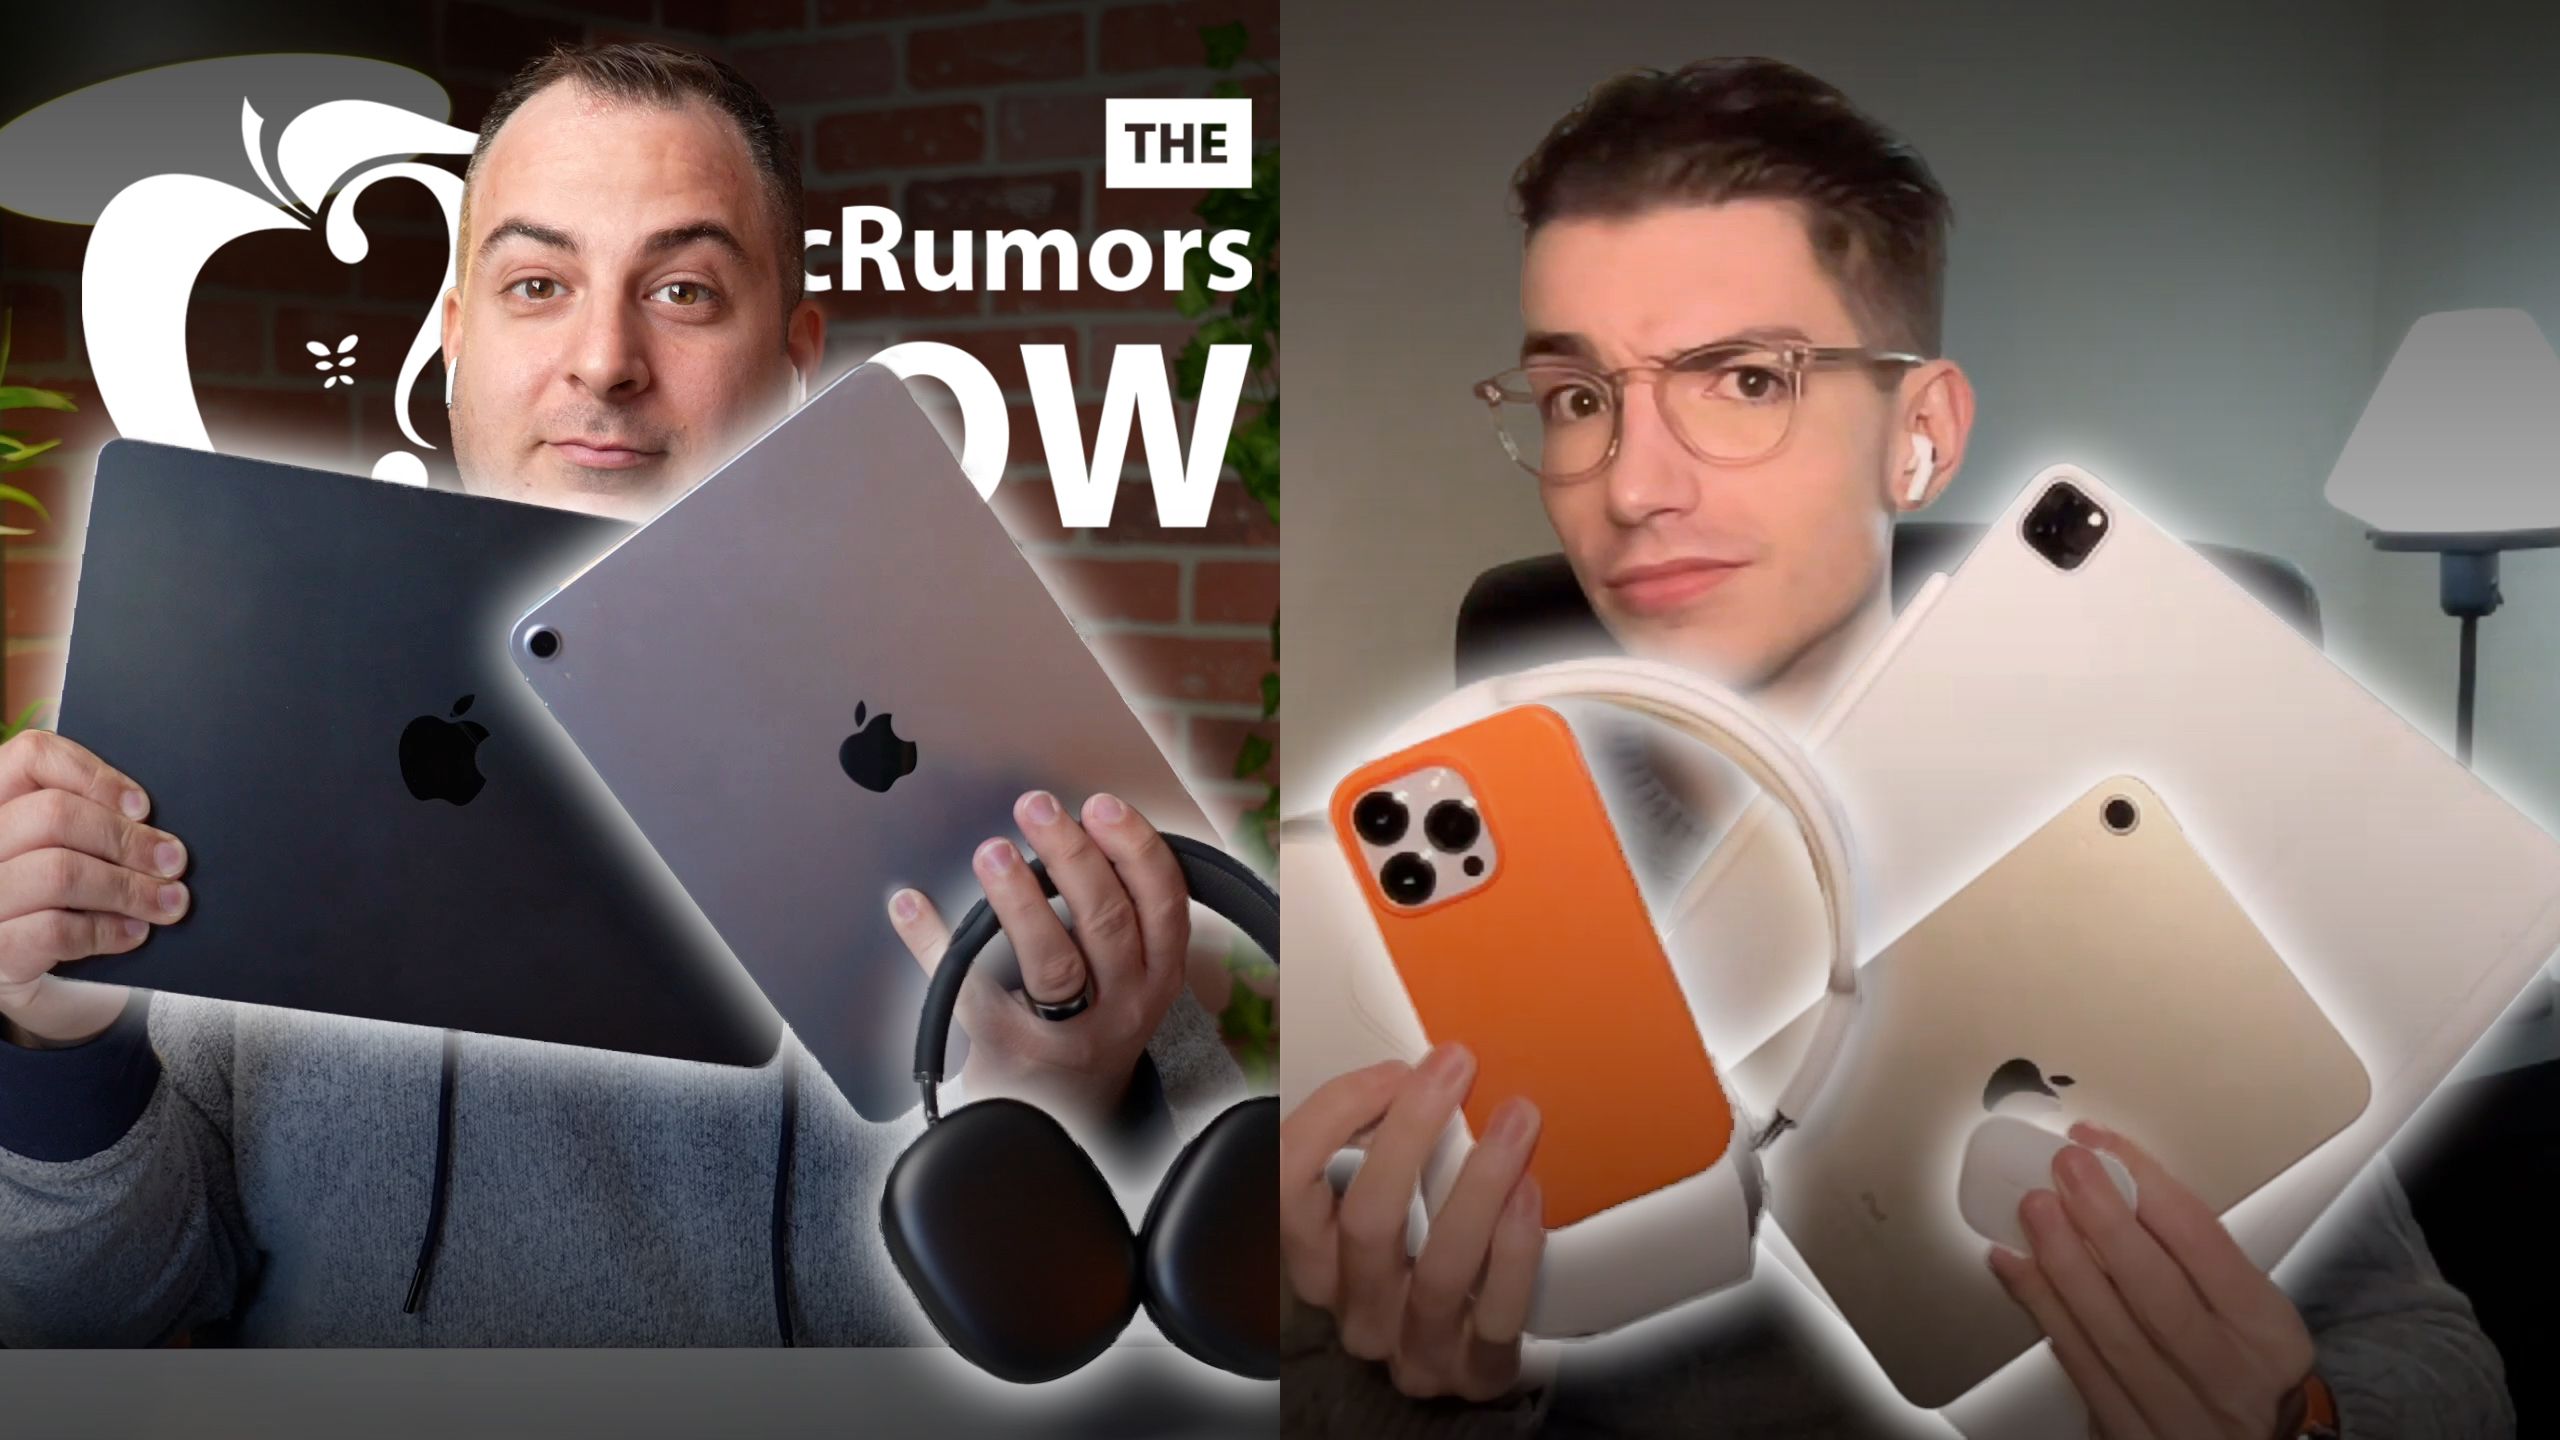 The MacRumors Show: How We Use Our Apple Devices - macrumors.com